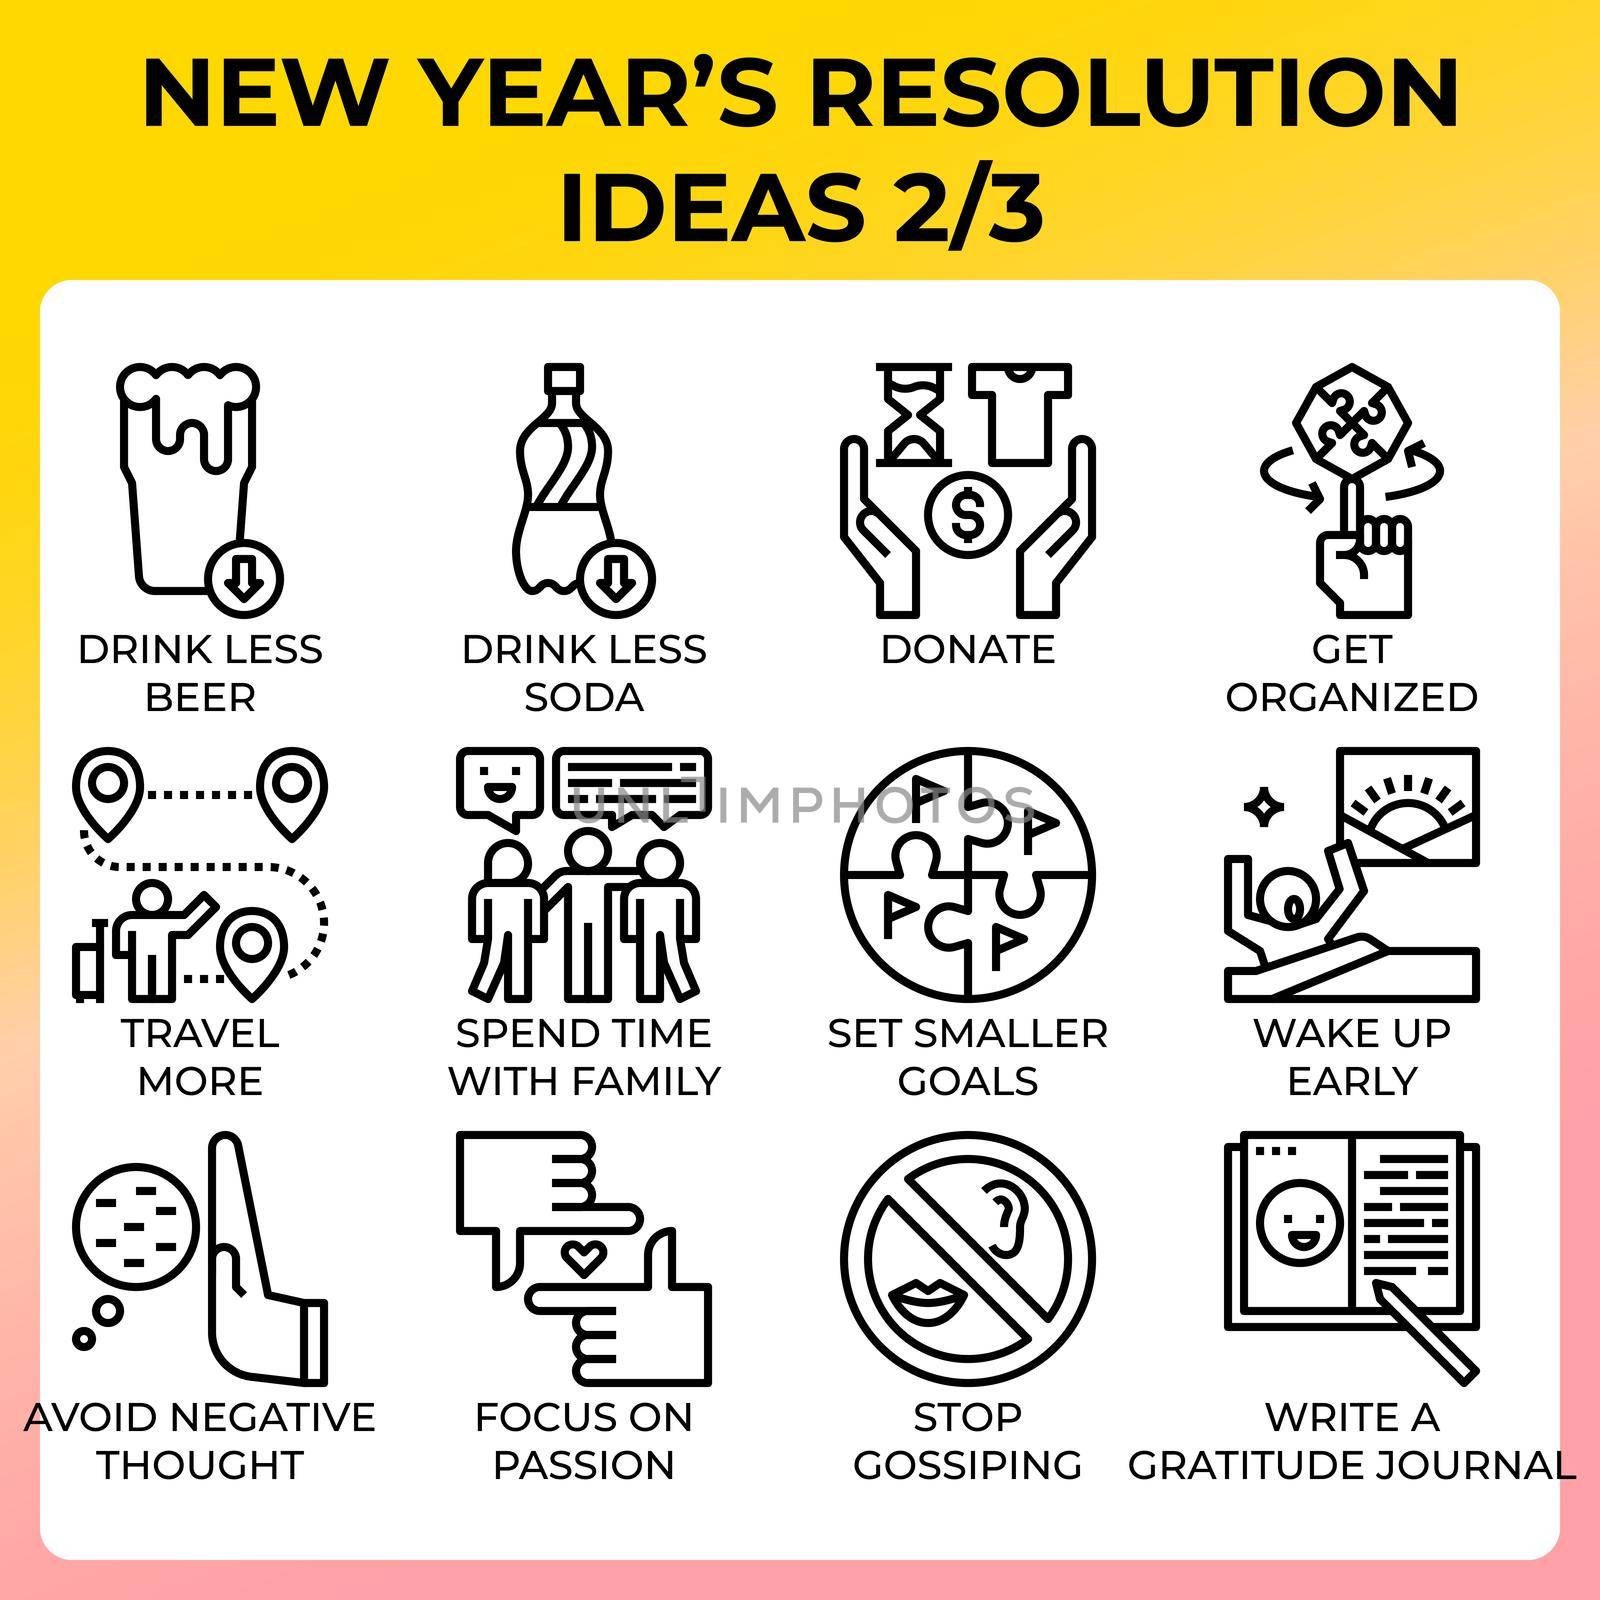 New year's resolution ideas icon set by nongpimmy